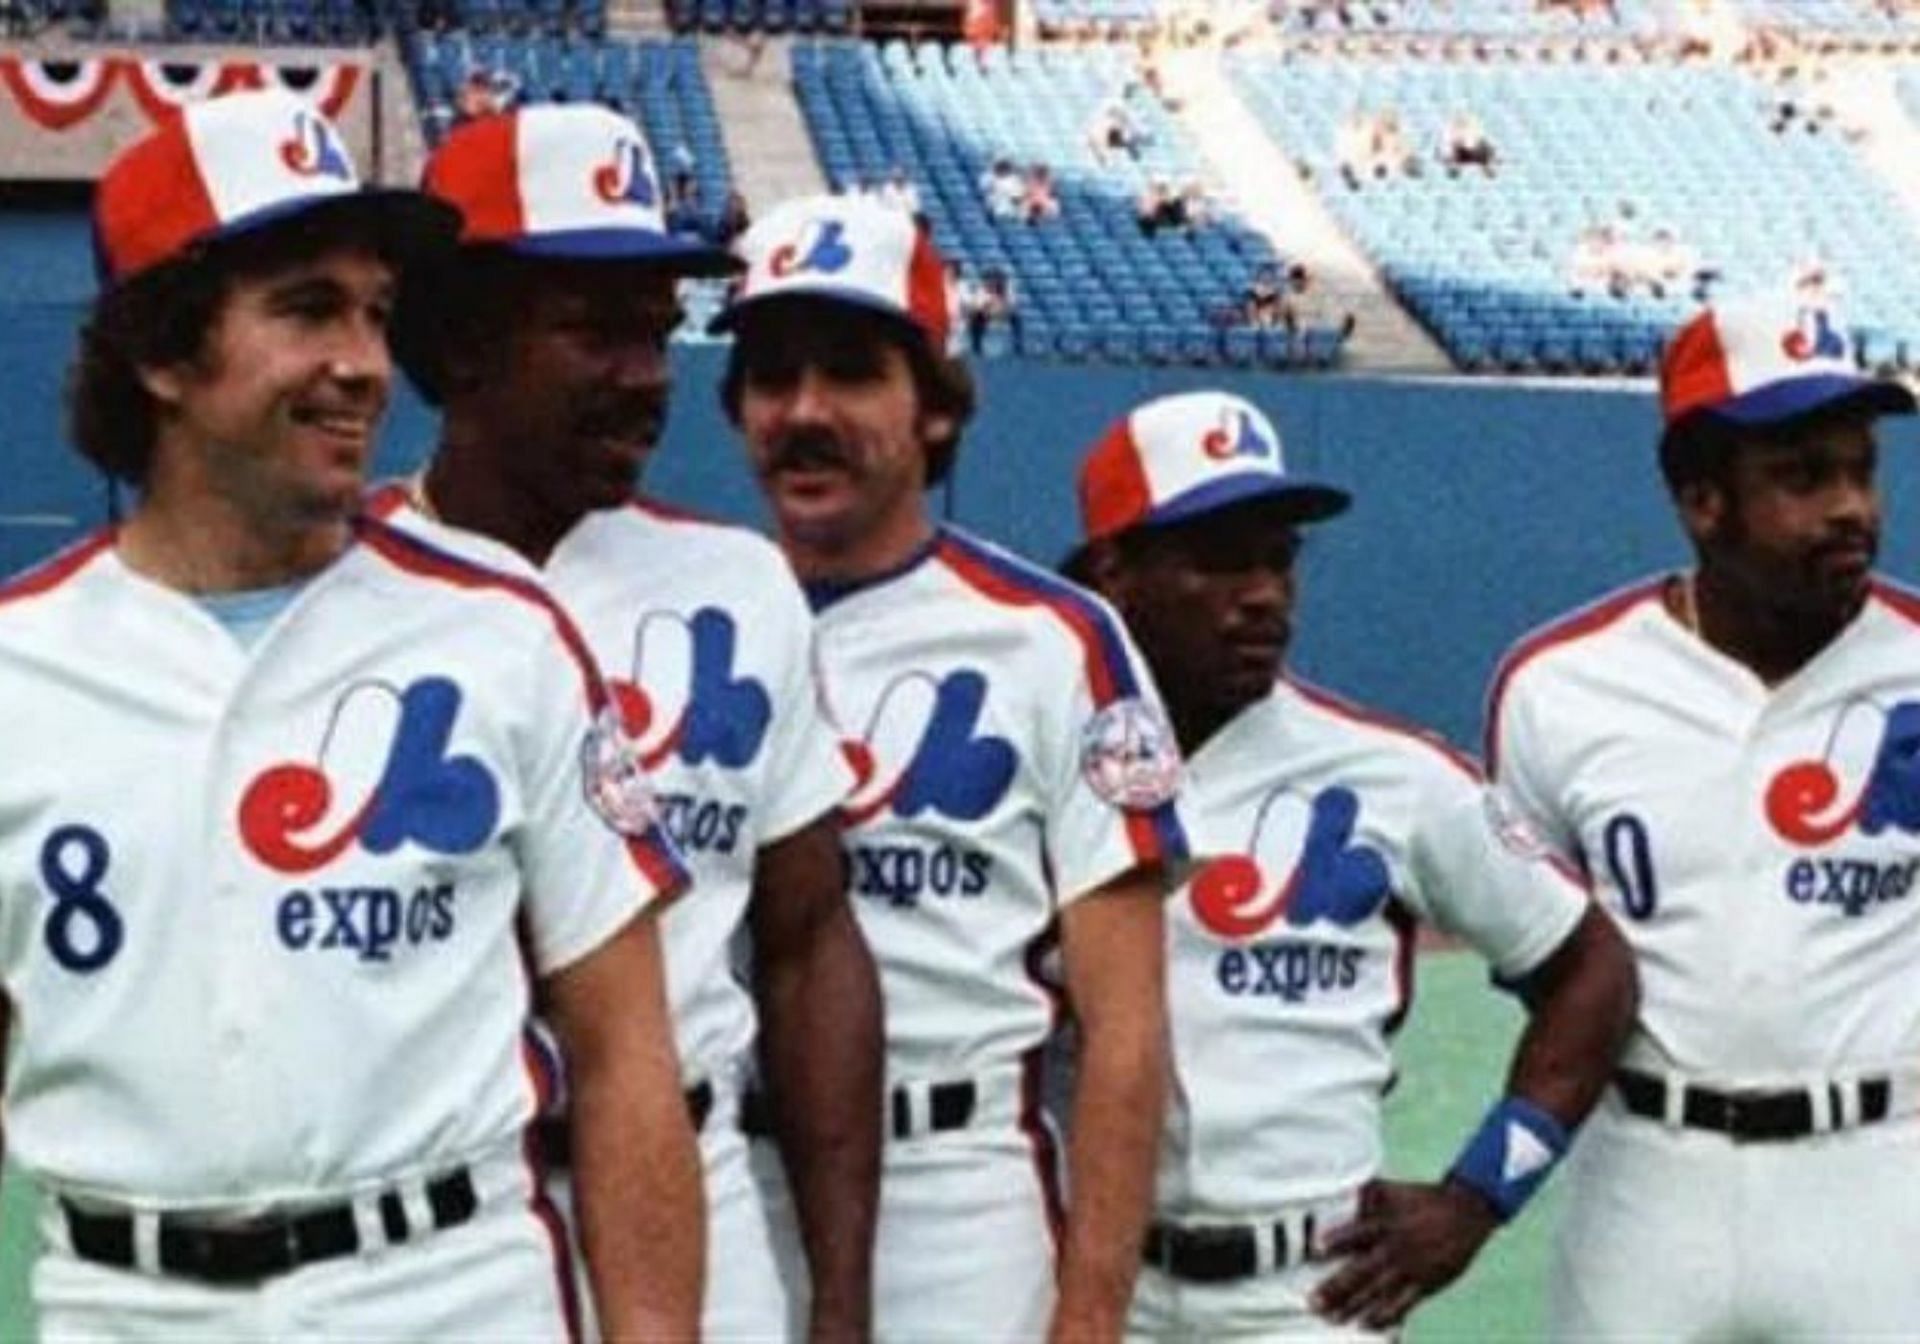 What happened to the Expos?